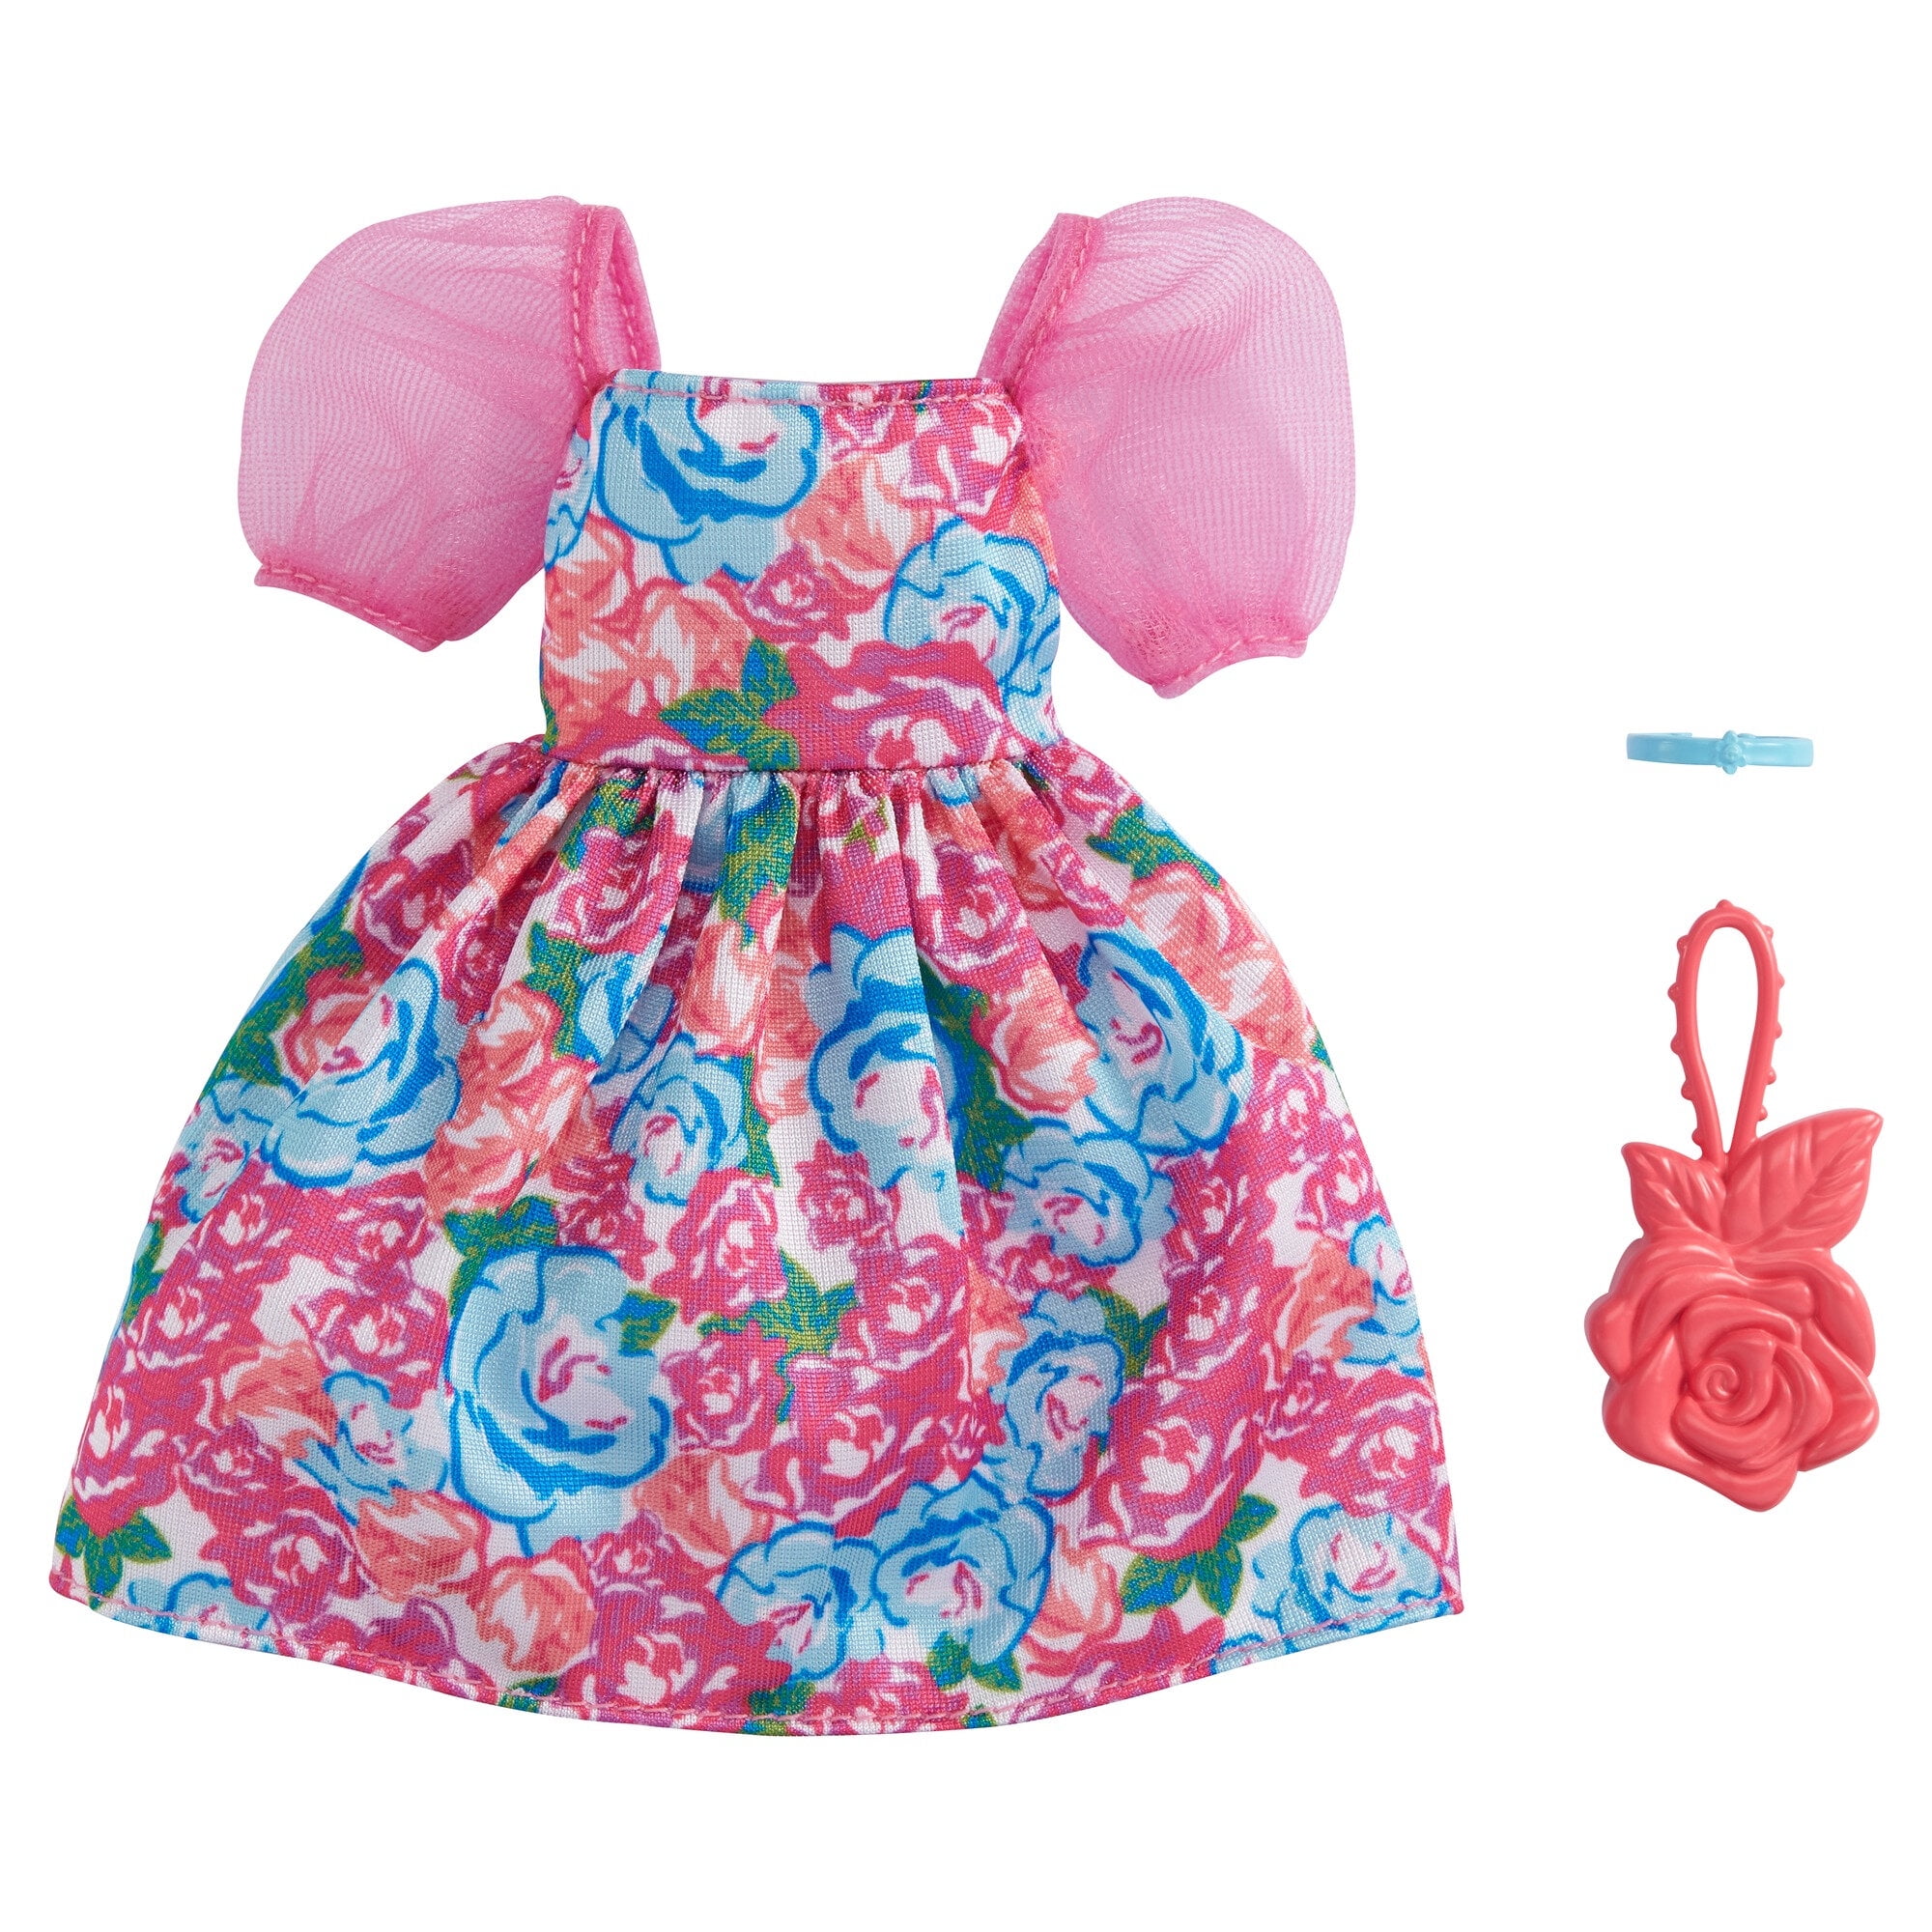 Barbie Clothes and Accessories, Floral Theme